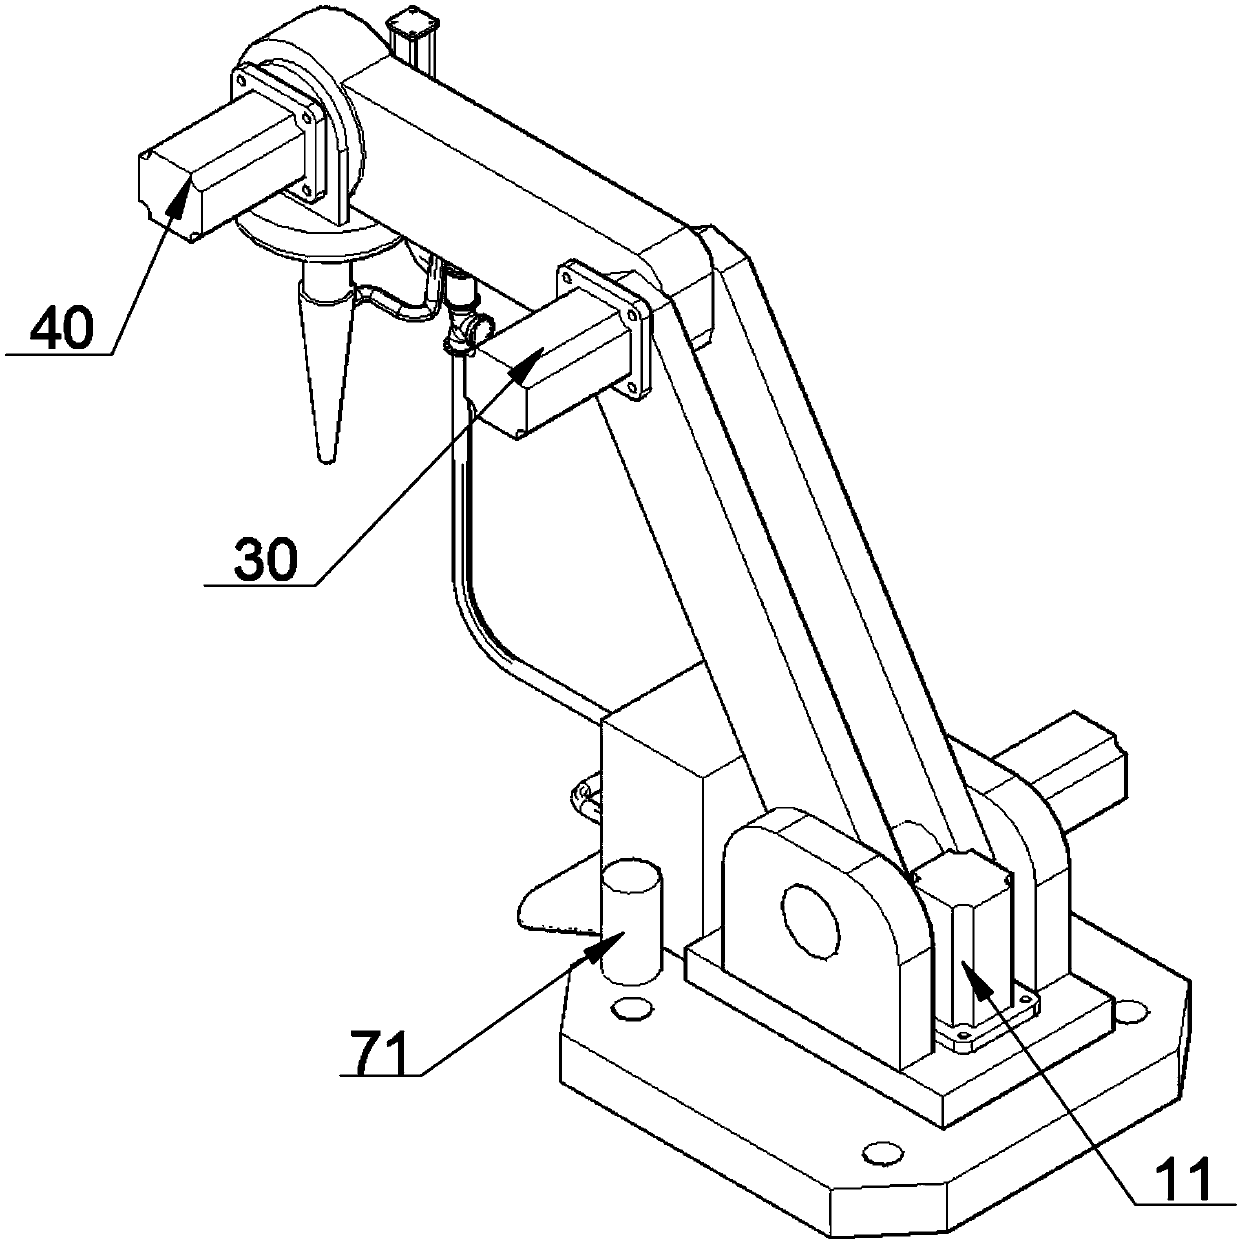 An industrial robot for filling